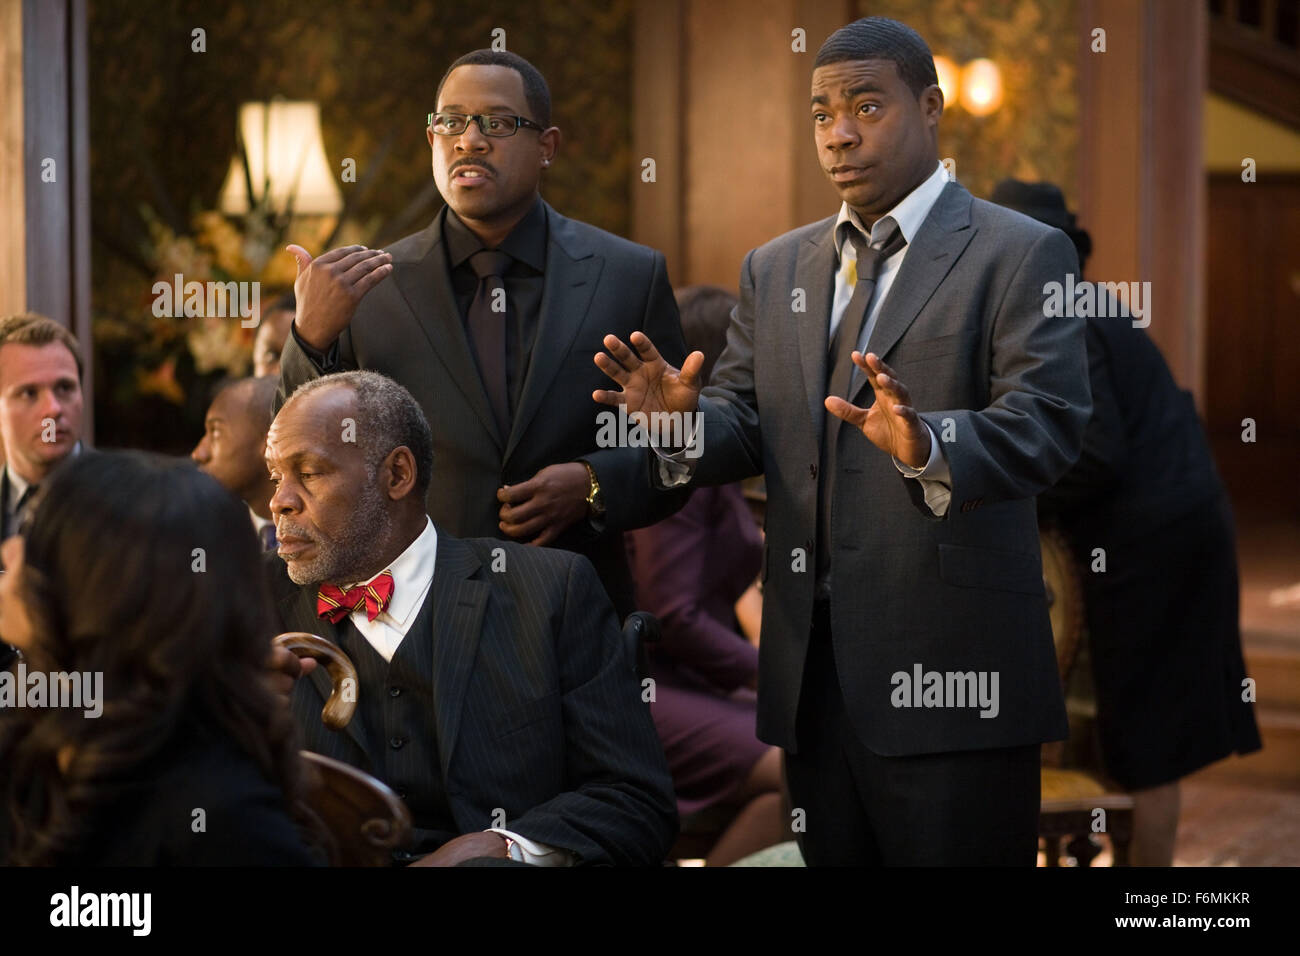 RELEASE DATE: April 16, 2010. MOVIE TITLE: Death At A Funeral. STUDIO: . PLOT: A funeral ceremony turns into a debacle of exposed family secrets and misplaced bodies.. PICTURED: MARTIN LAWRENCE as Ryan, TRACY MORGAN (R) as Norman and DANNY GLOVER as Uncle Russell. Stock Photo